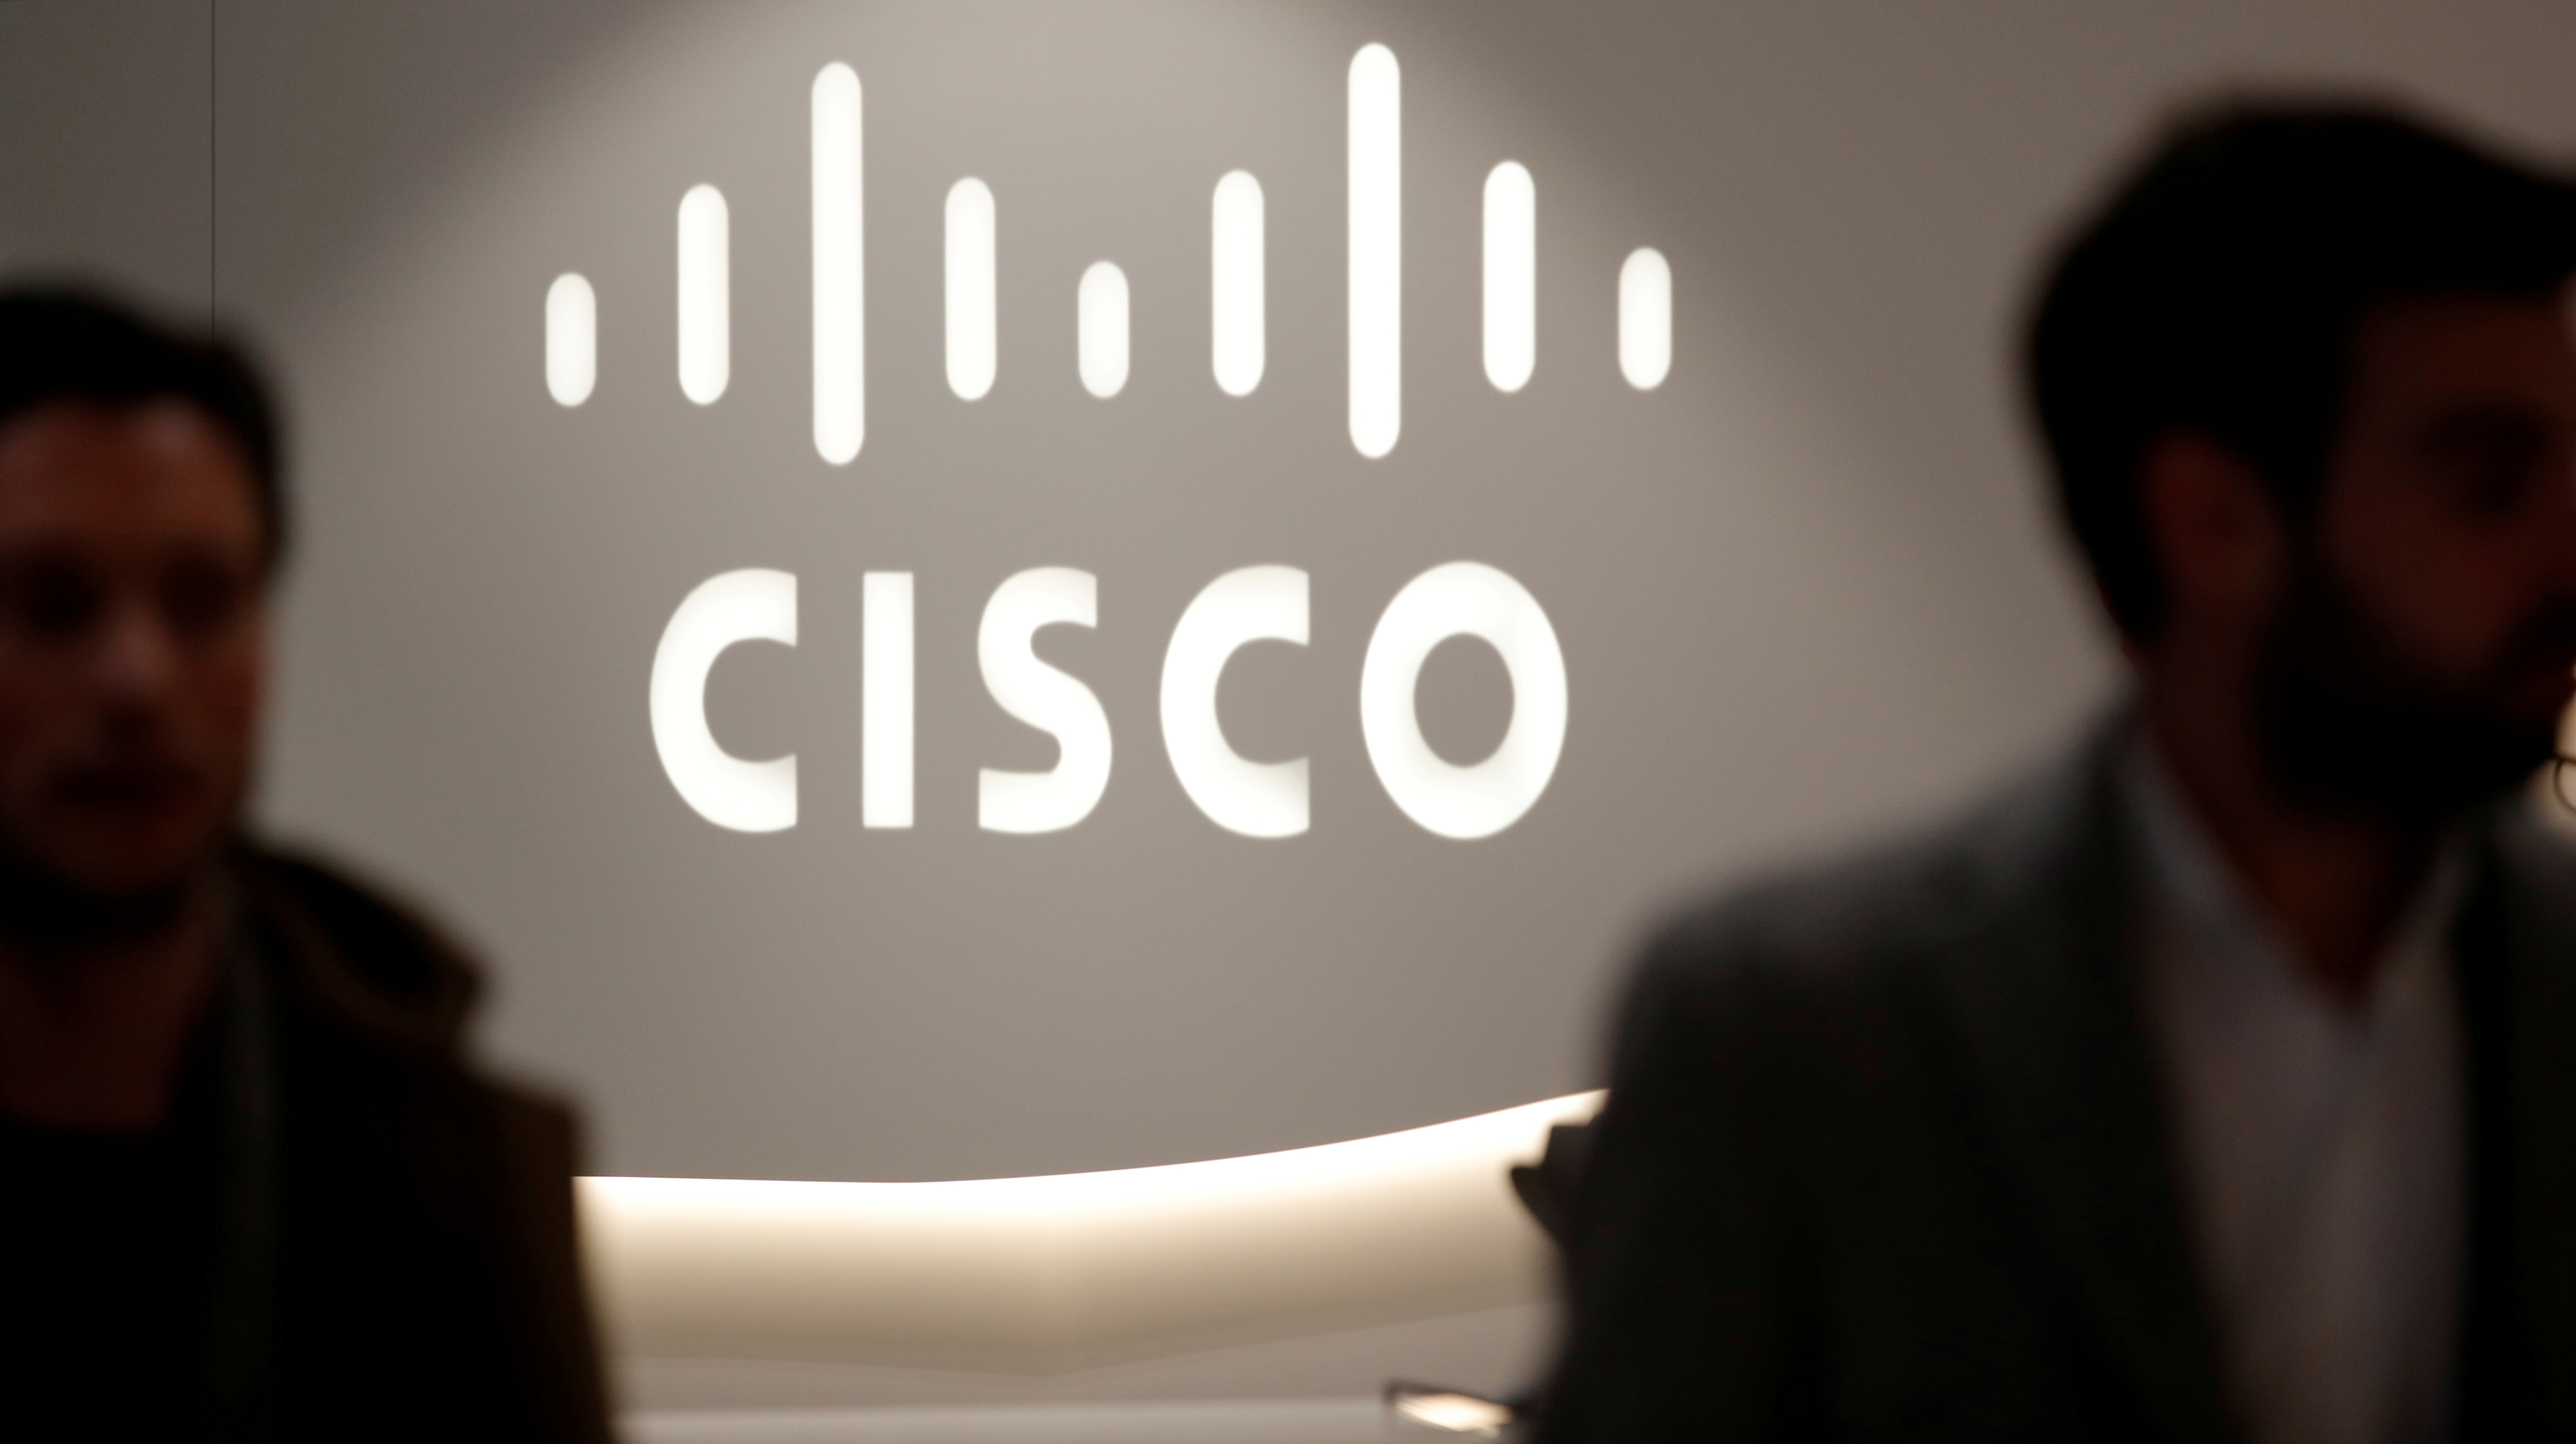 The logo of US networks giant Cisco Systems is seen at their headquarters in Issy-les-Moulineaux, near Paris